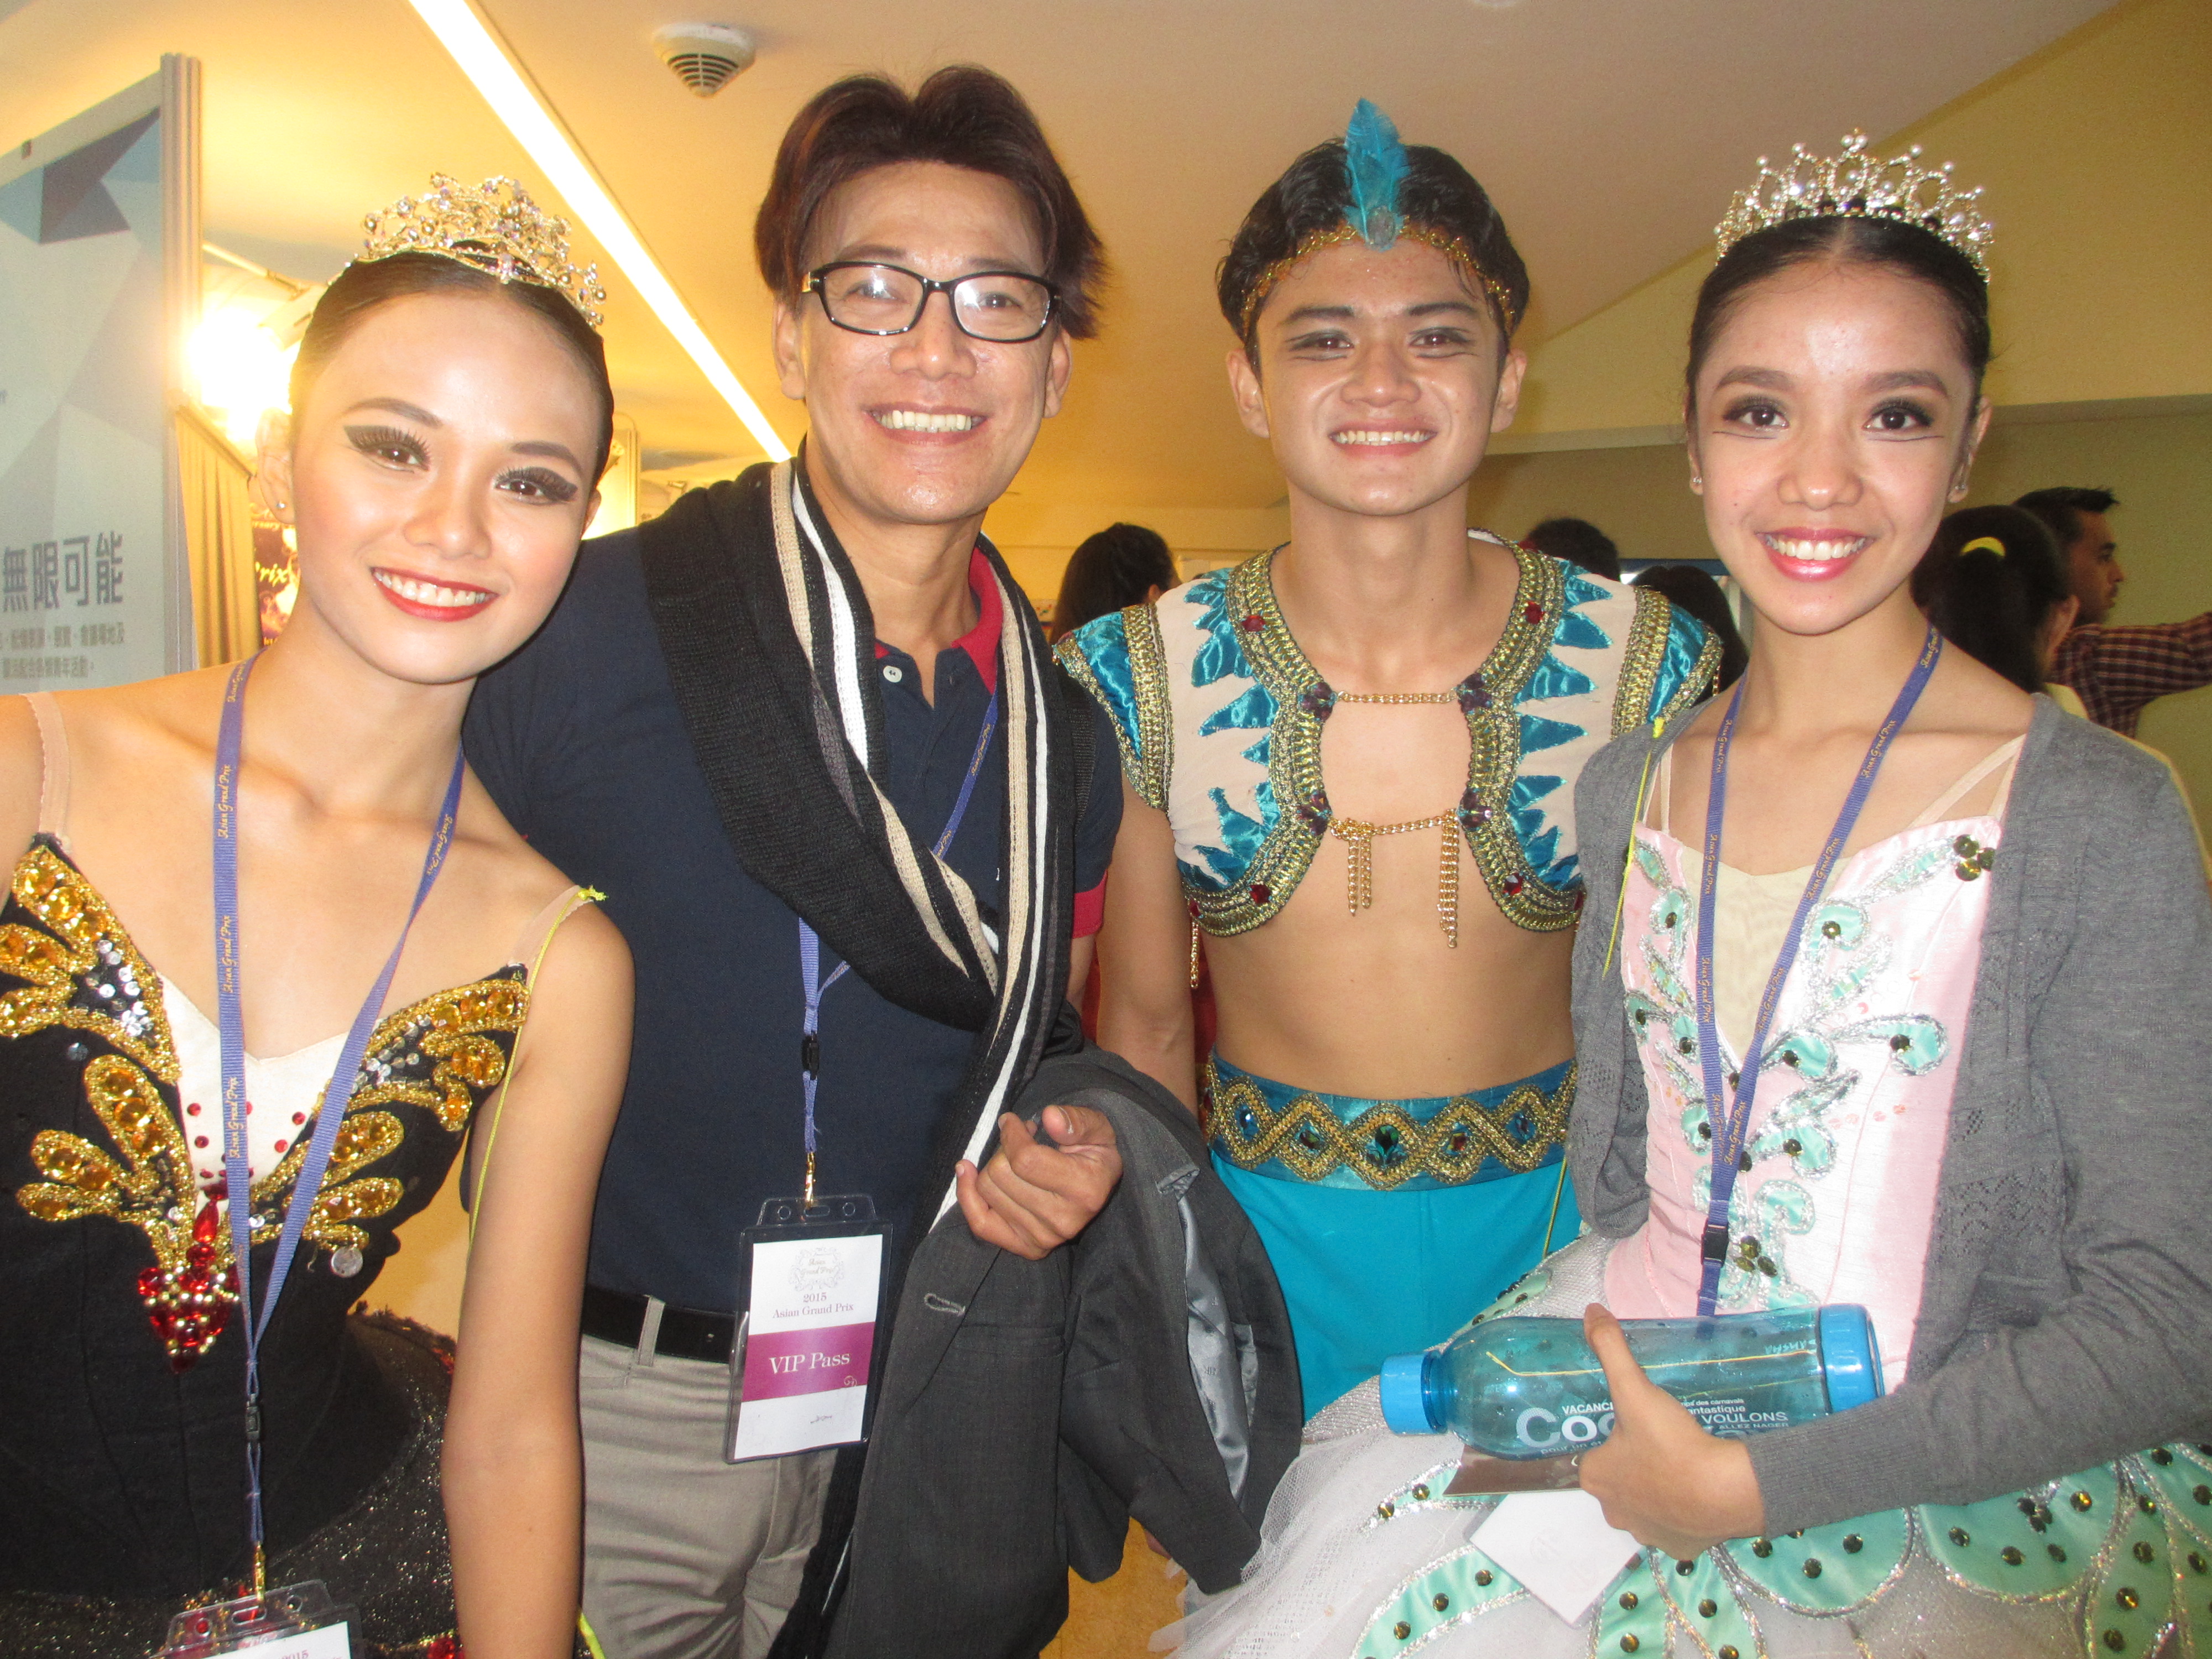 With mentor Osias Barroso (second from left) and fellow BM finalists (from left) Rissa May Camaclang and Joshua Enciso